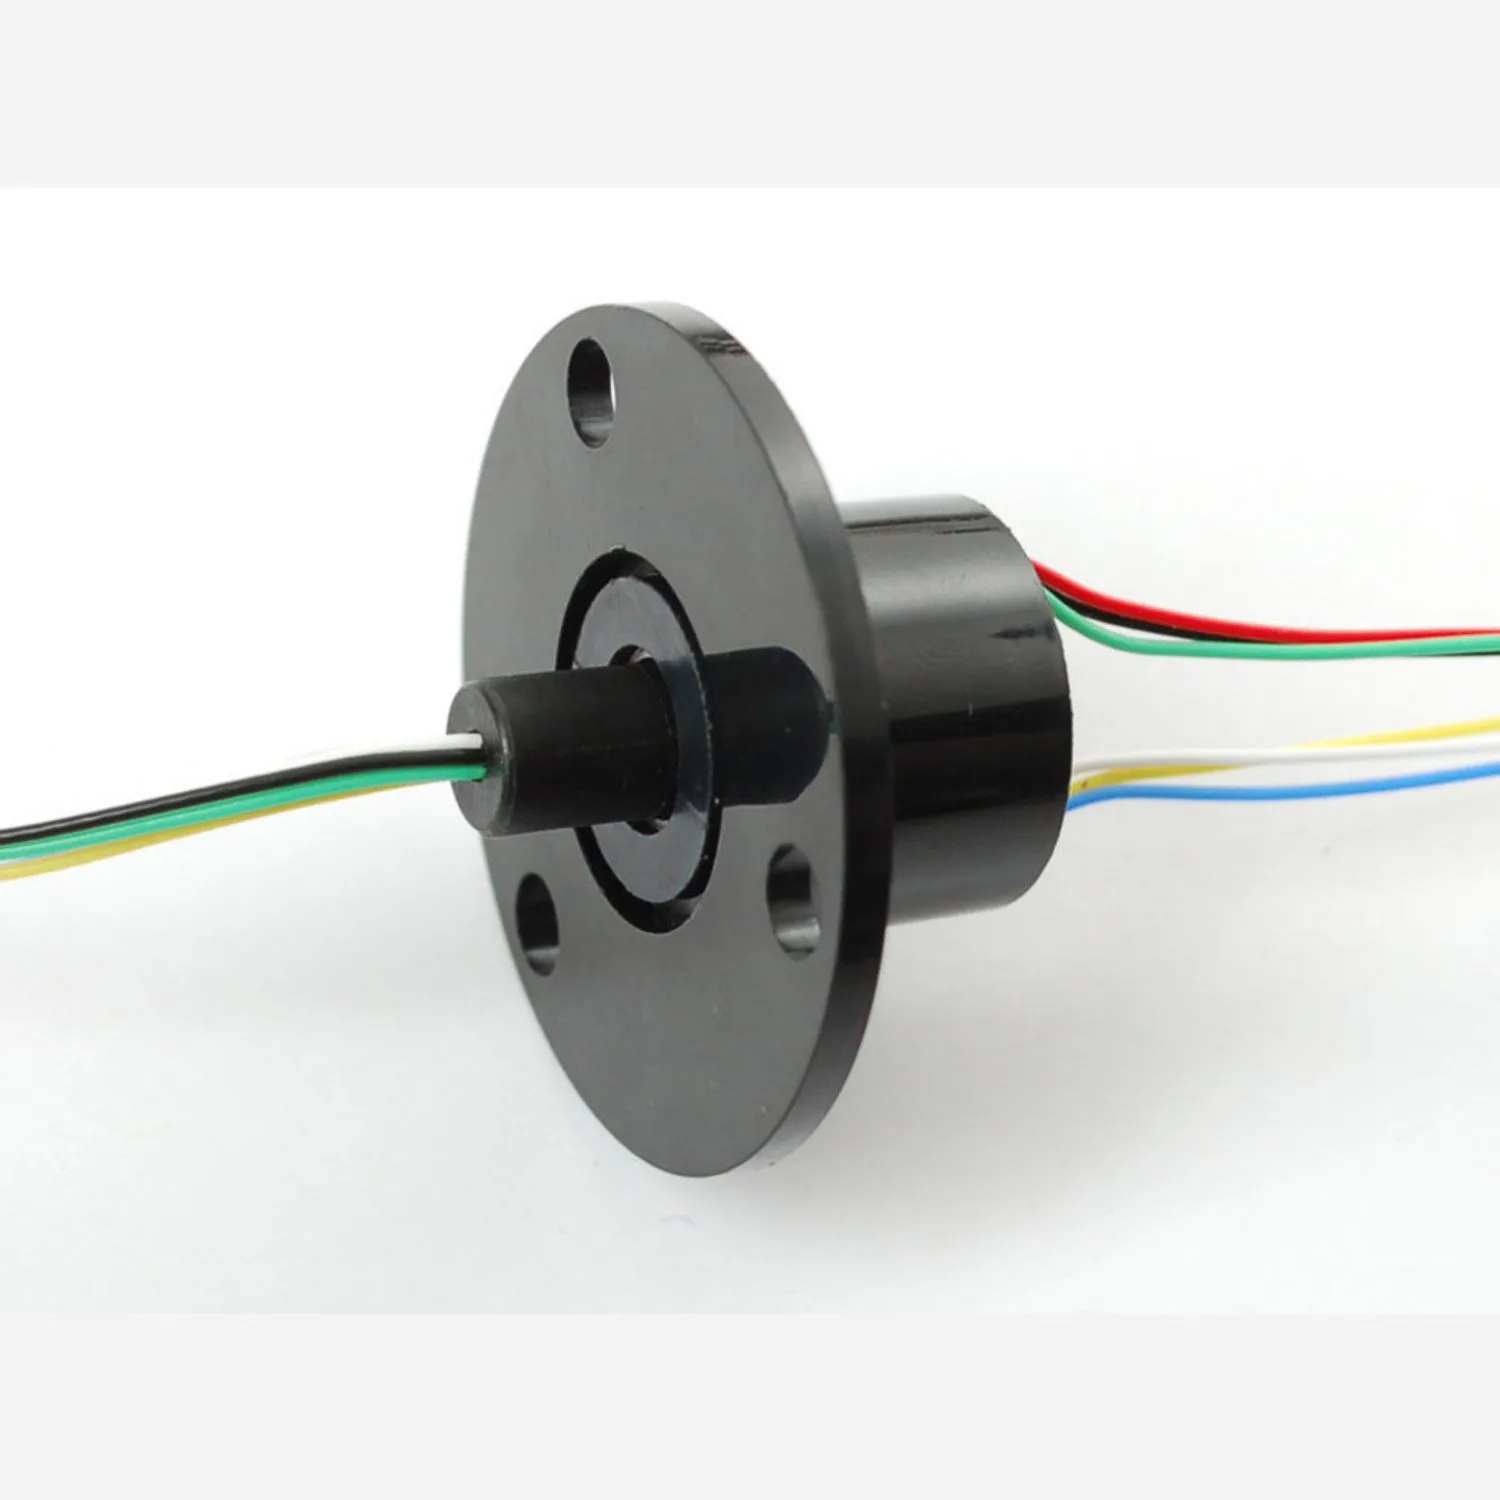 Photo of Slip Ring with Flange - 22mm diameter, 6 wires, max 240V @ 2A